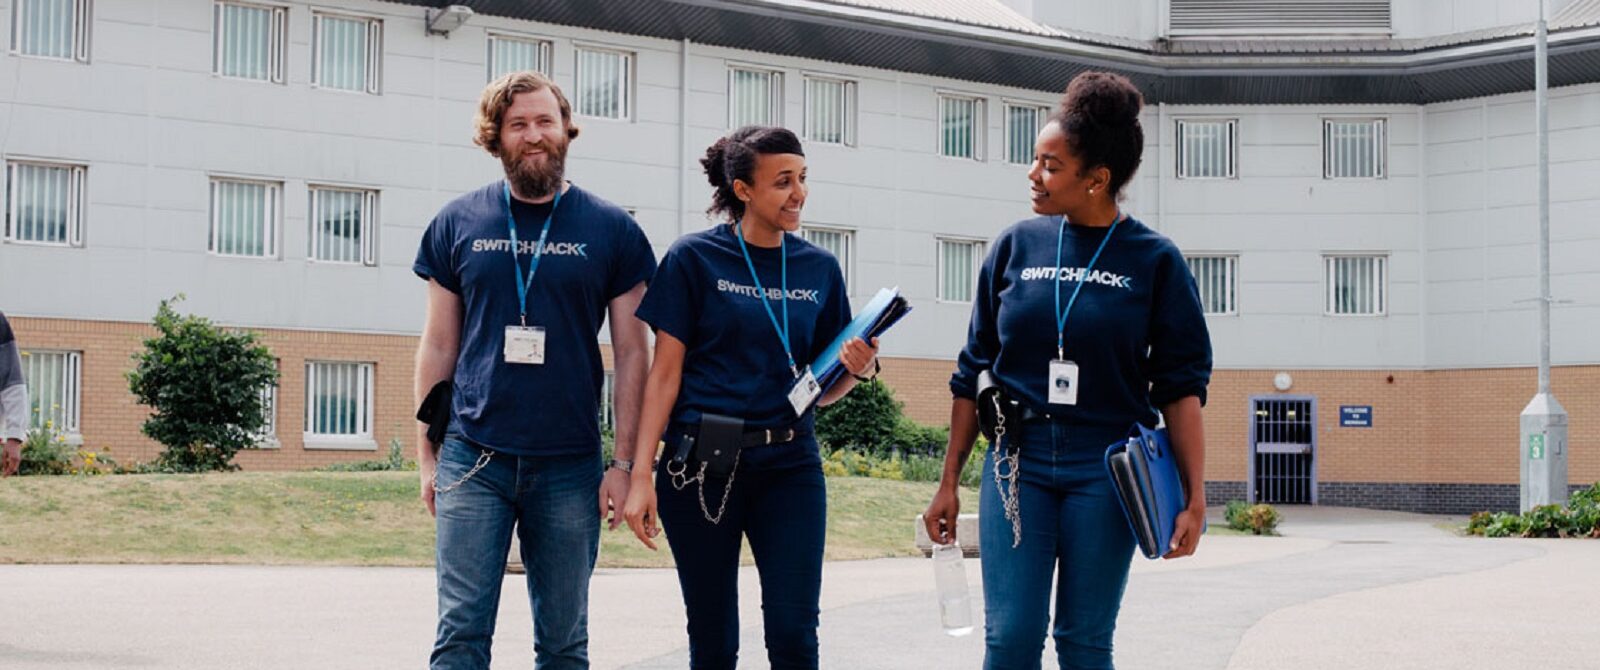 Three charity workers from Switchback walk through a courtyard. Switchback is a London-based charity that support young men to find a way out of the criminal justice system and build stable and rewarding lives.